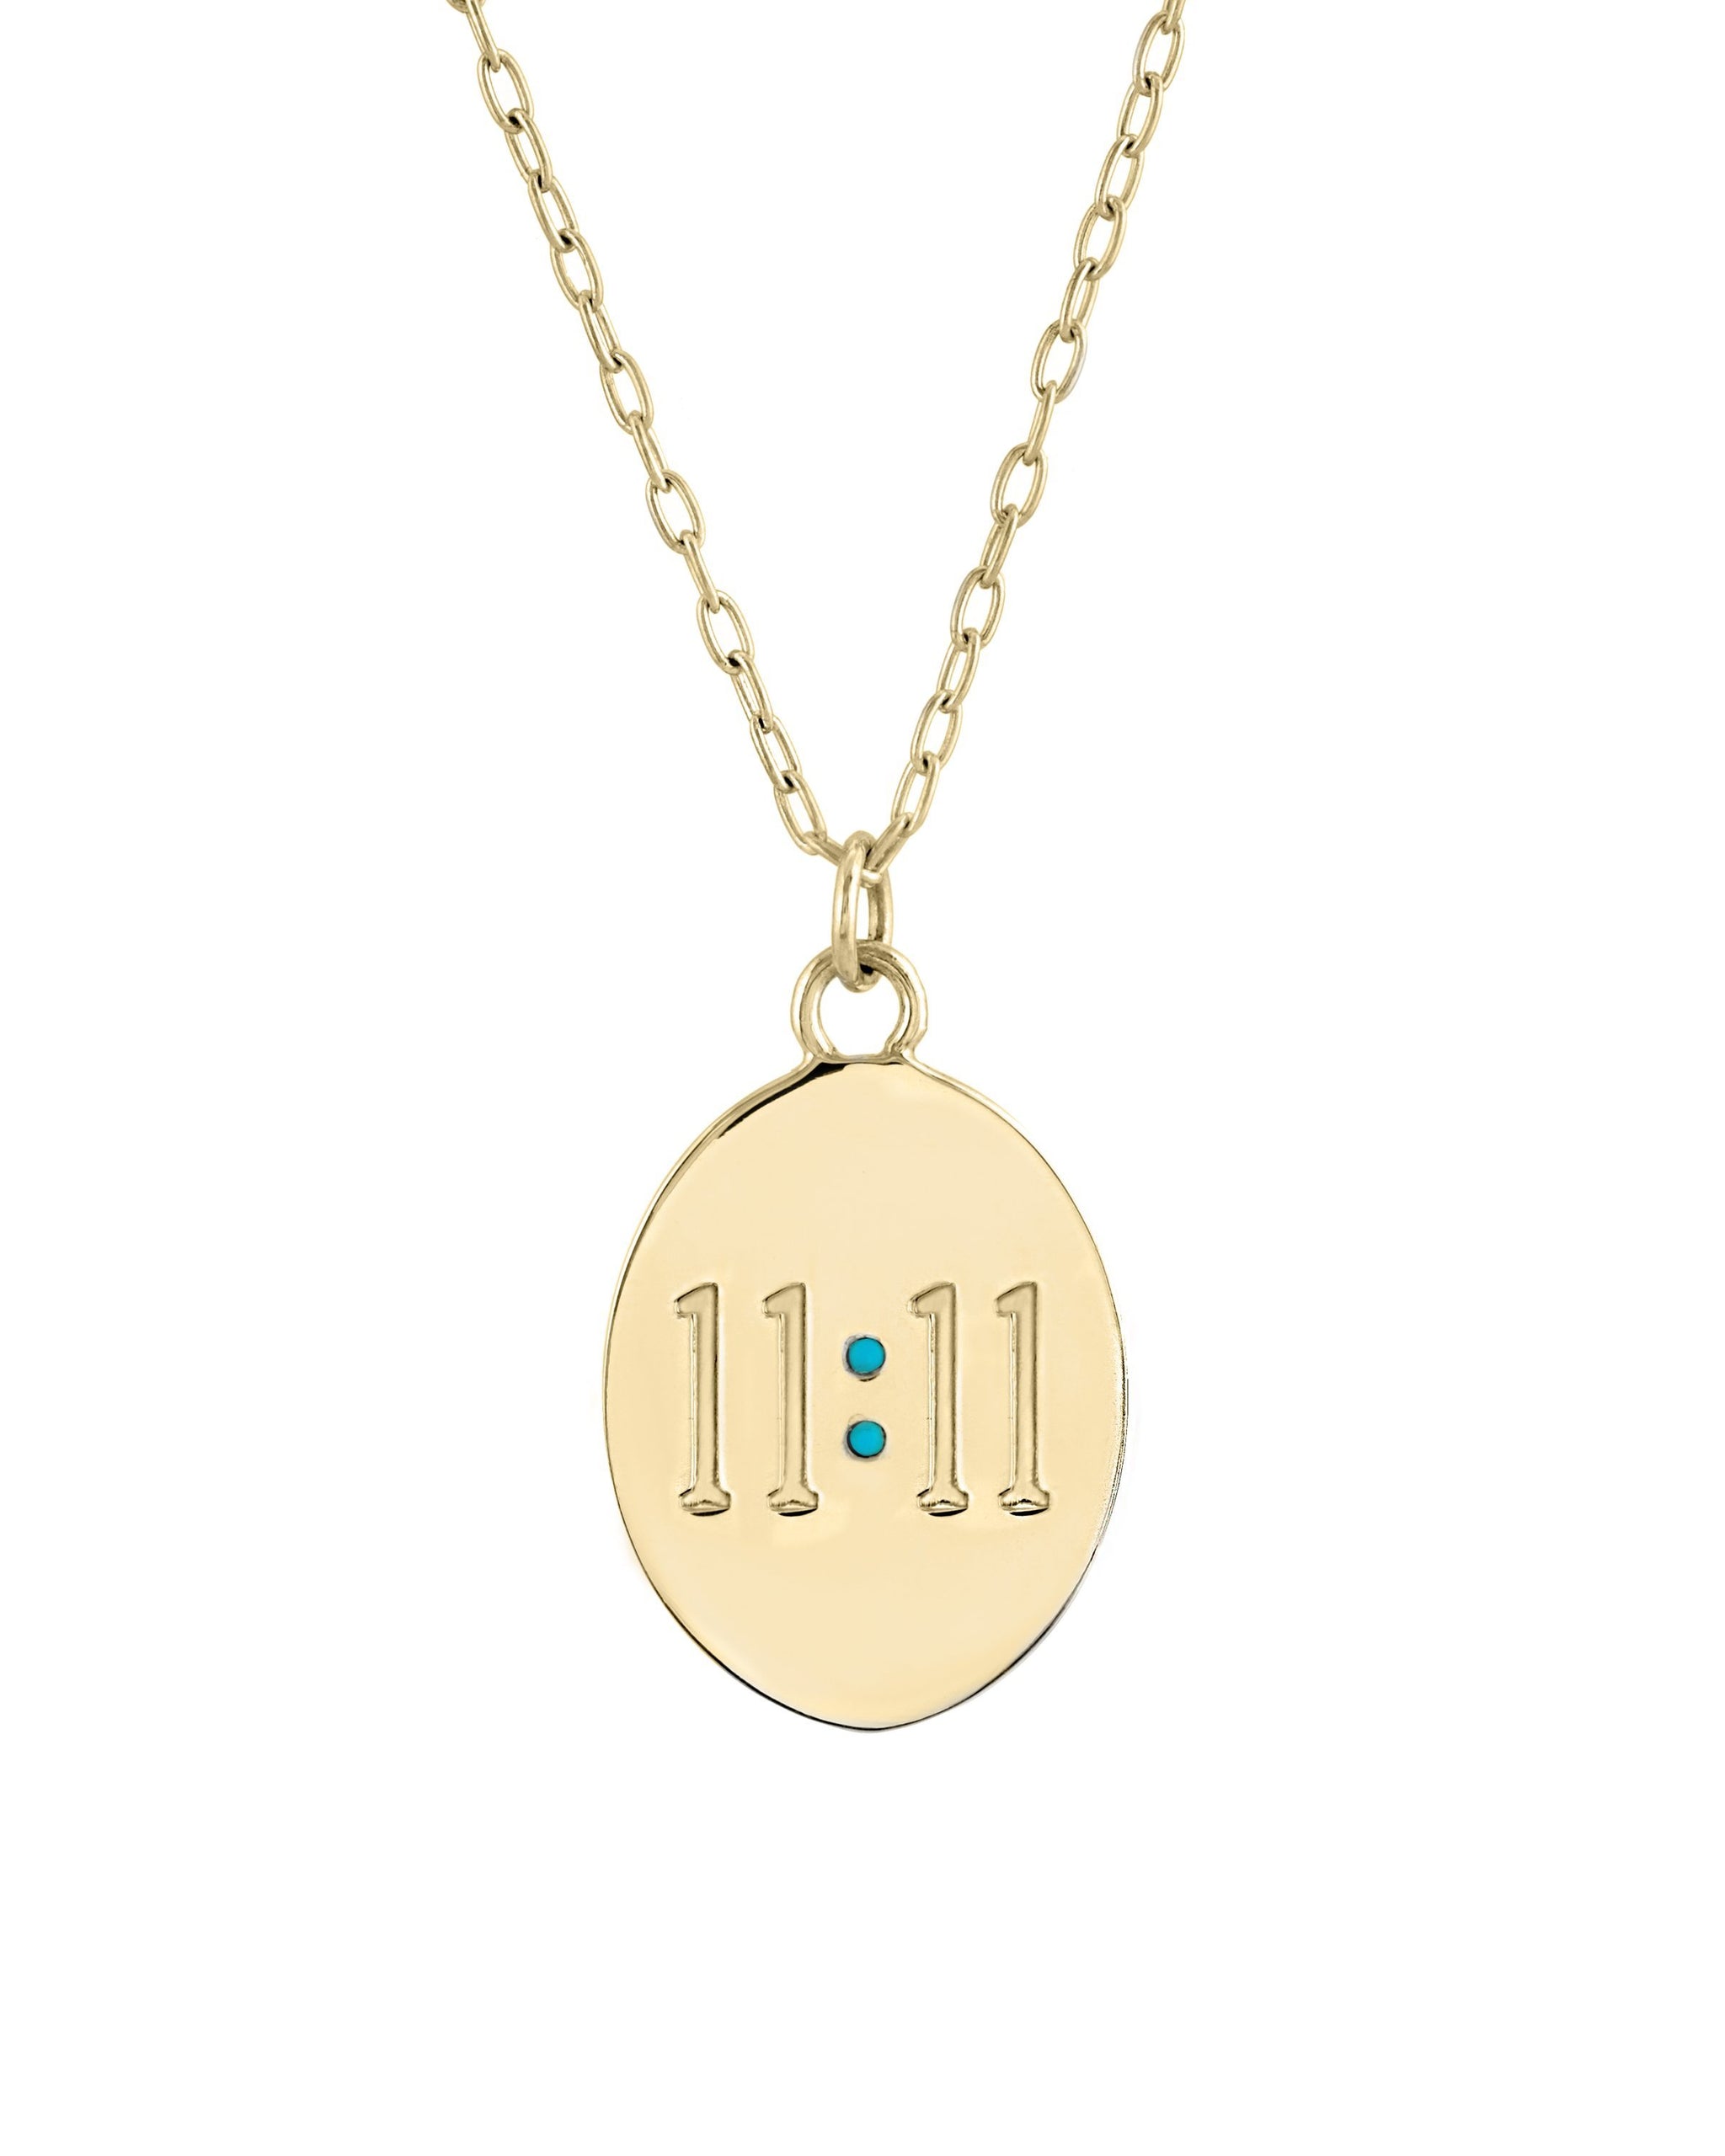 11:11 Necklace, Oval Medallion with 11:11 engraved and two 1mm semi-precious stones, "make a wish" engraved on the back, 14k gold vermeil, handmade by Turquoise + Tobacco in Los Angeles, California 